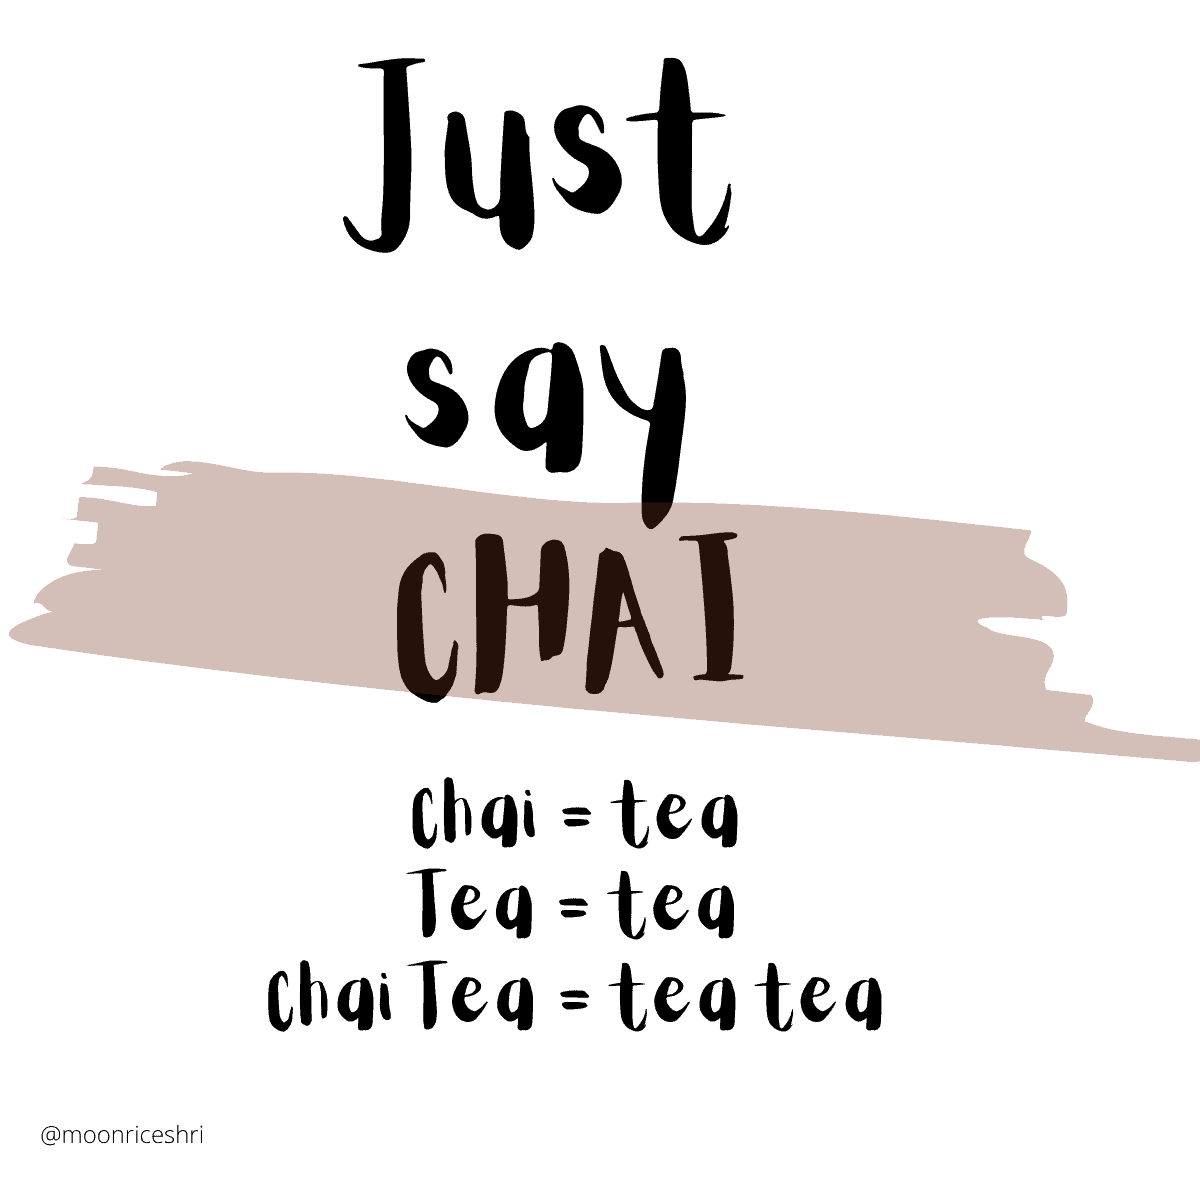 Infographic that conveys that saying chai tea is redundant so you should "just say chai".